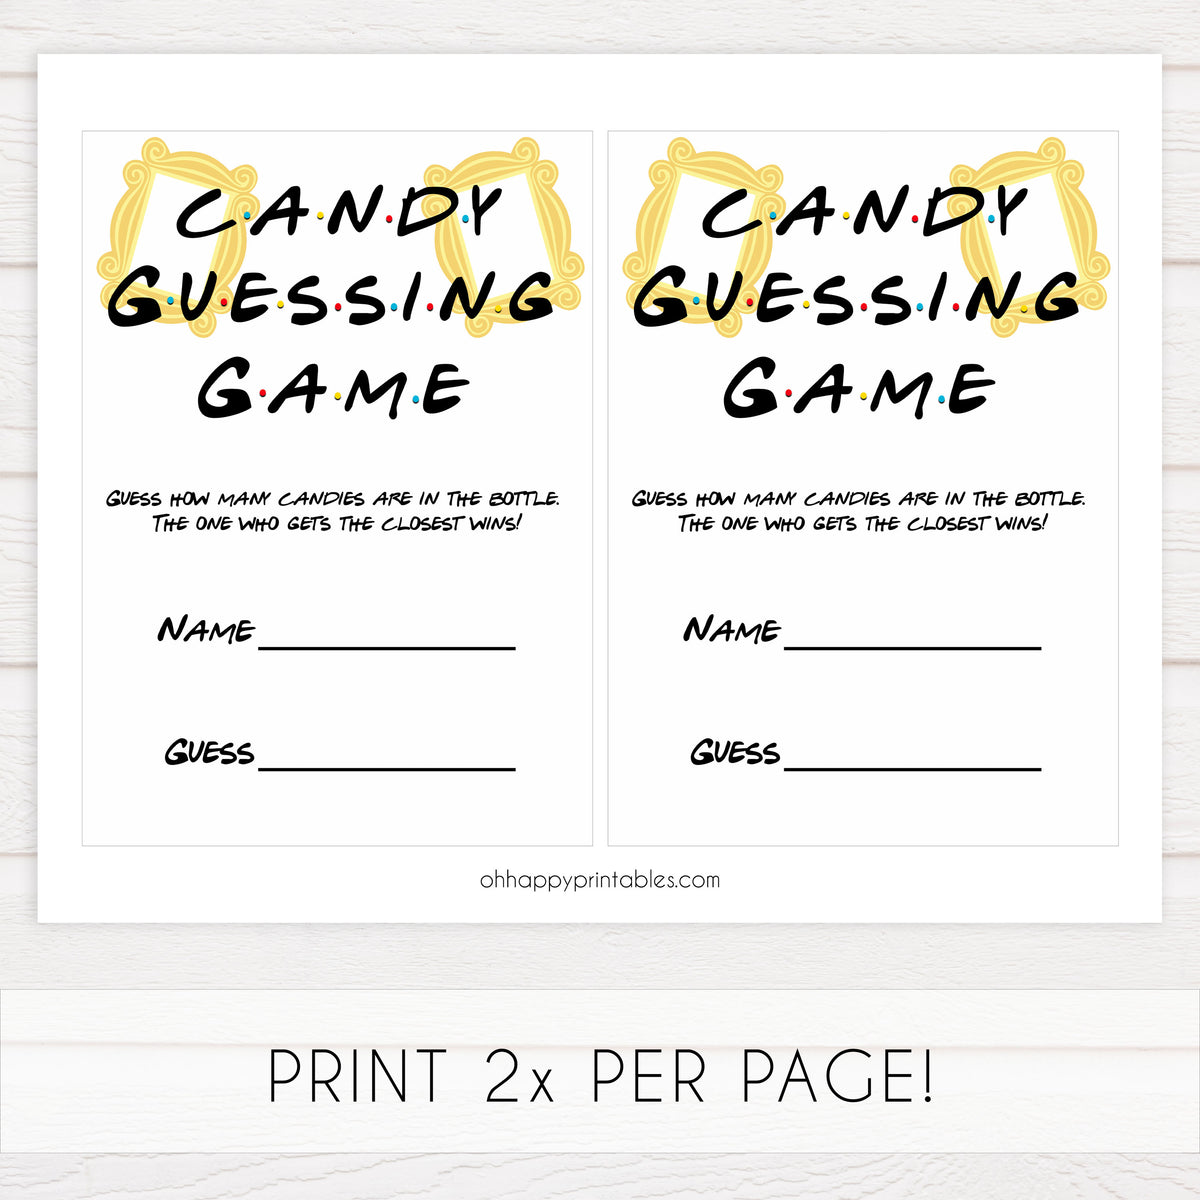 candy-guessing-game-free-printable